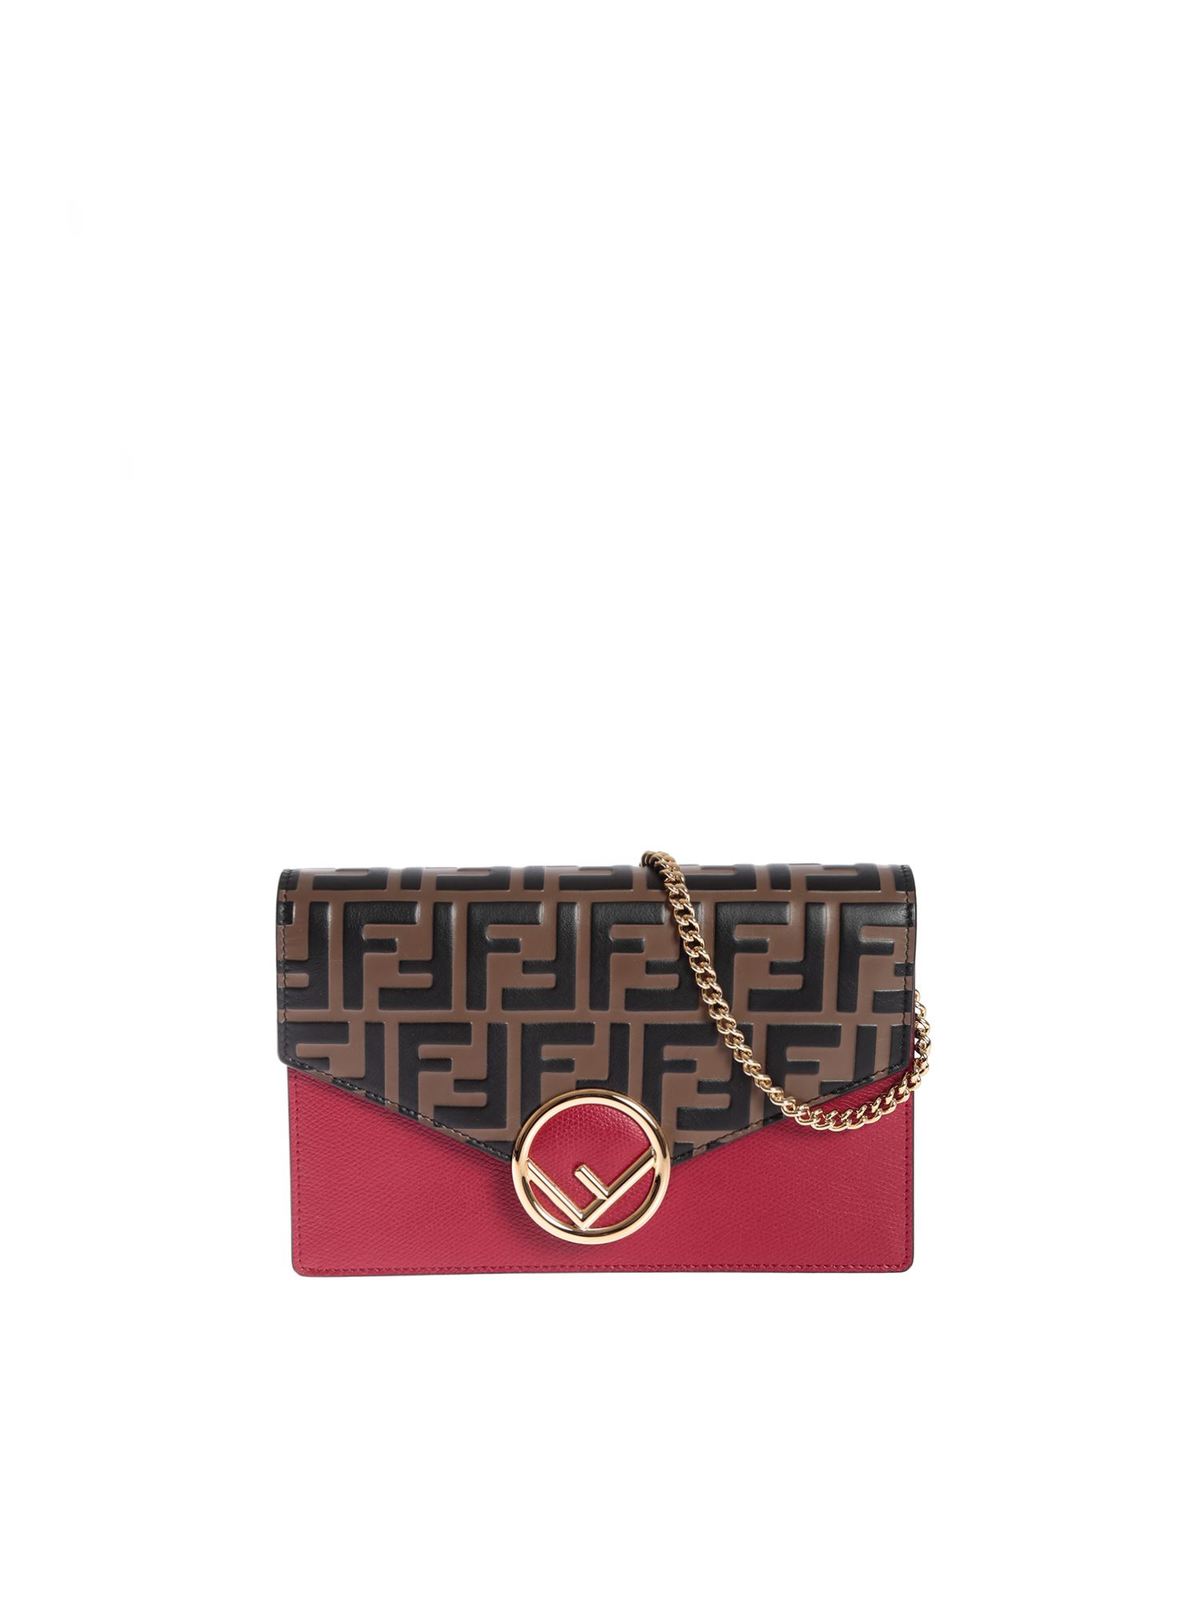 Fendi - Wallet On Chain bag in red with 